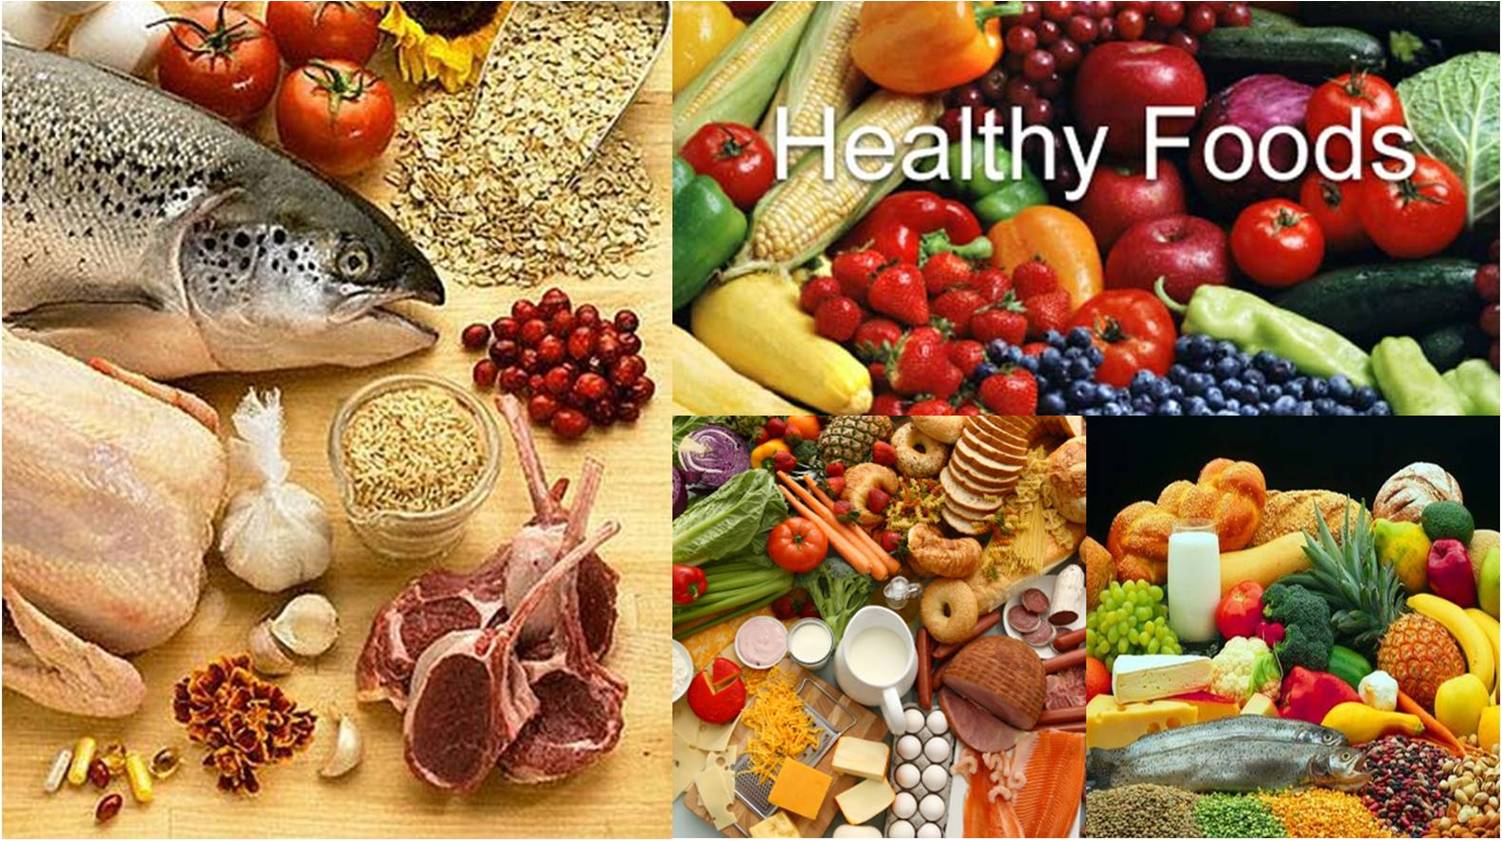 Download this Healthy Food picture